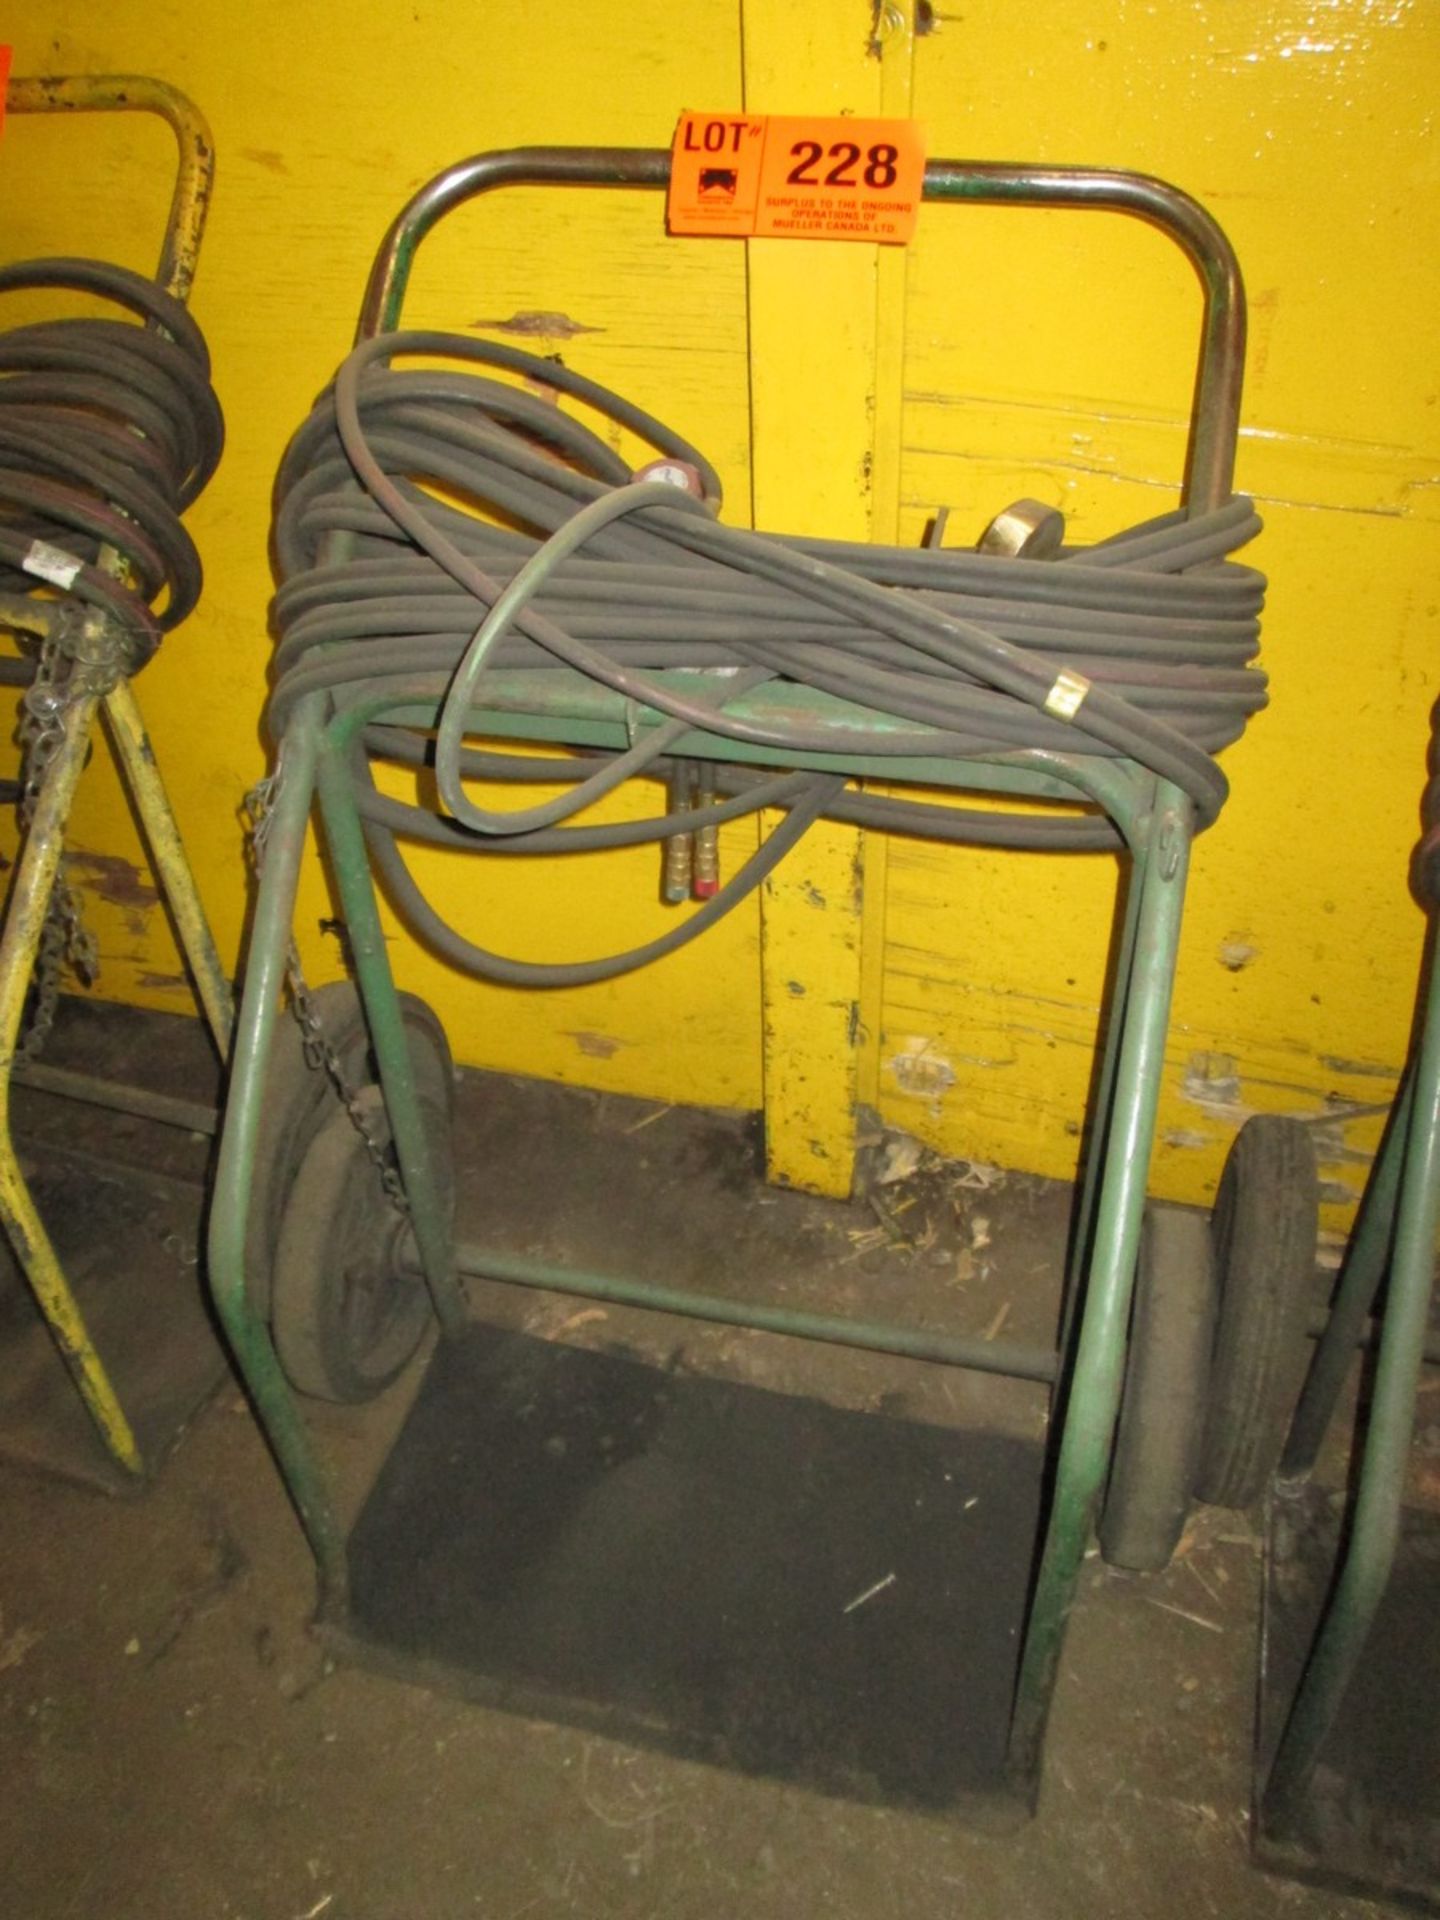 LOT/ OXY-ACETYLENE TANK CADDY WITH GAUGES AND HOSE